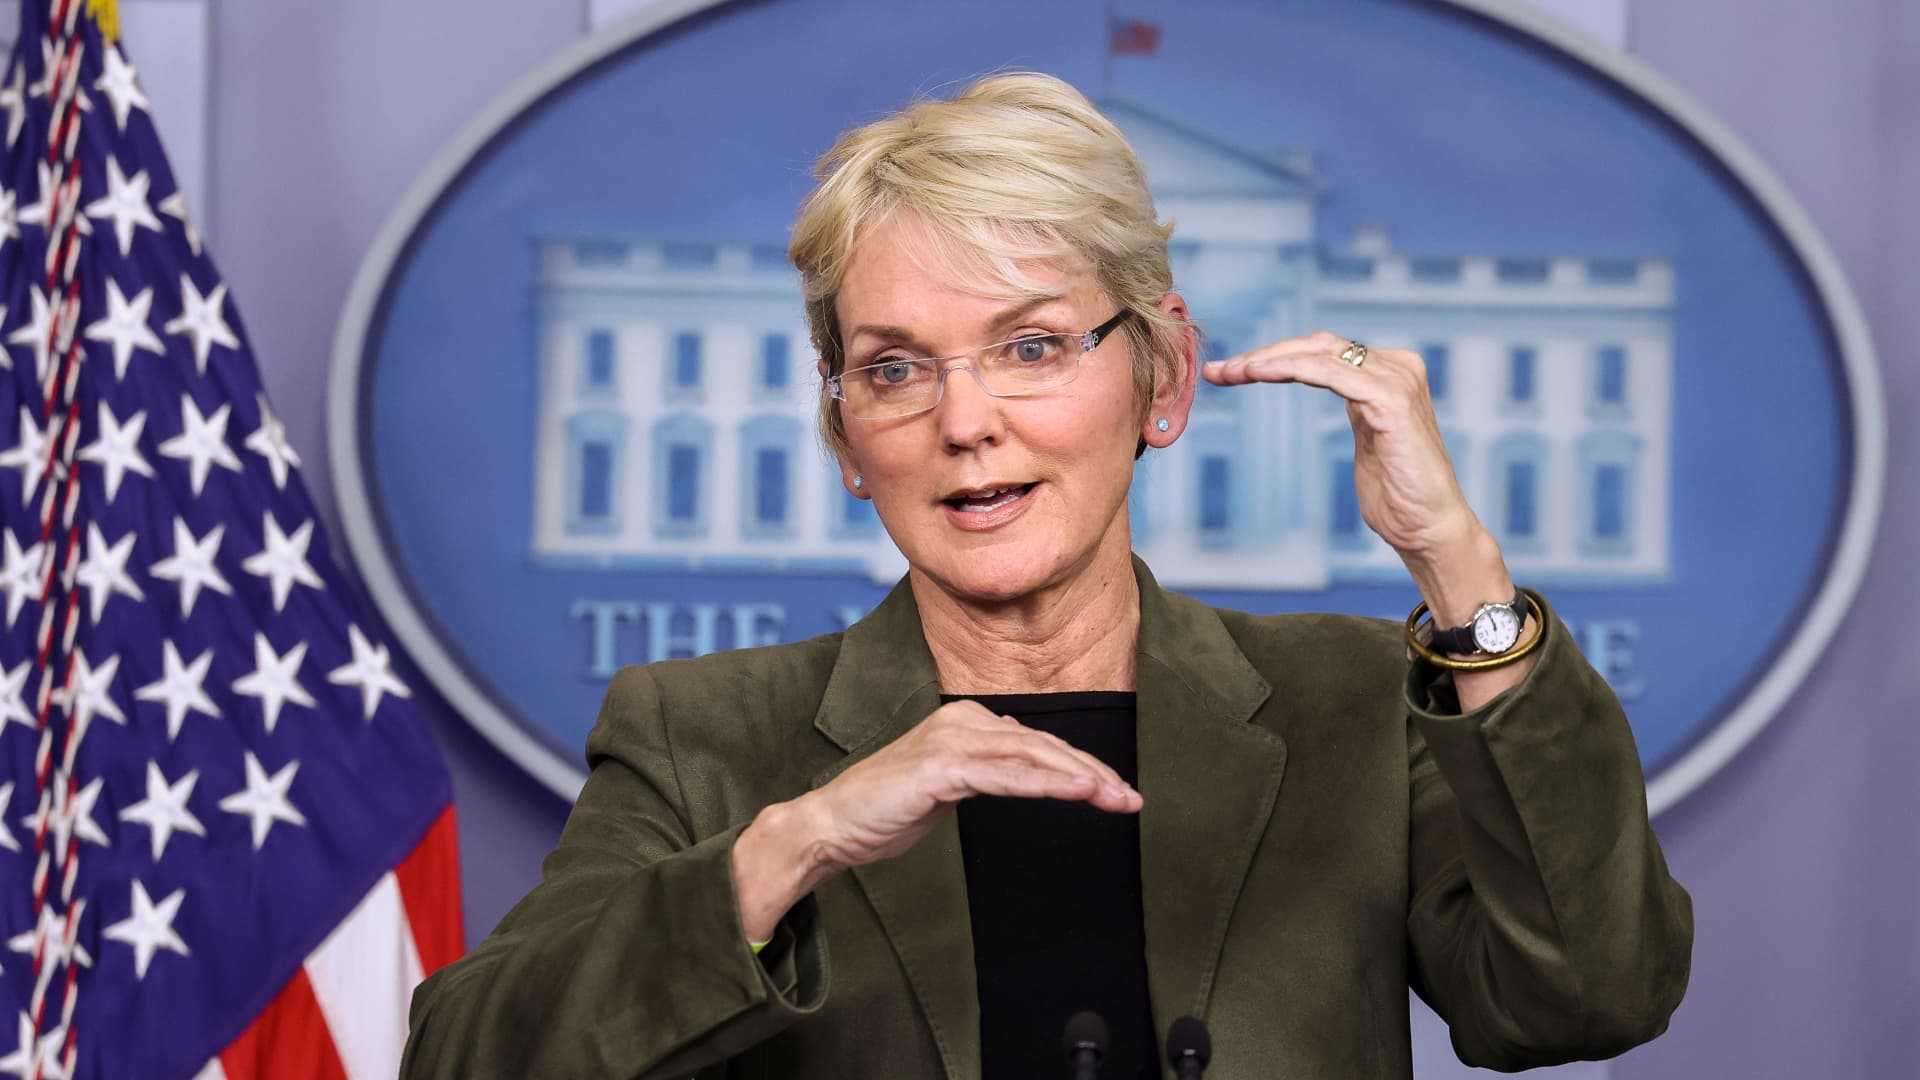 Secretary of Energy Jennifer Granholm takes questions during a media briefing at the White House in Washington, U.S., November 23, 2021.